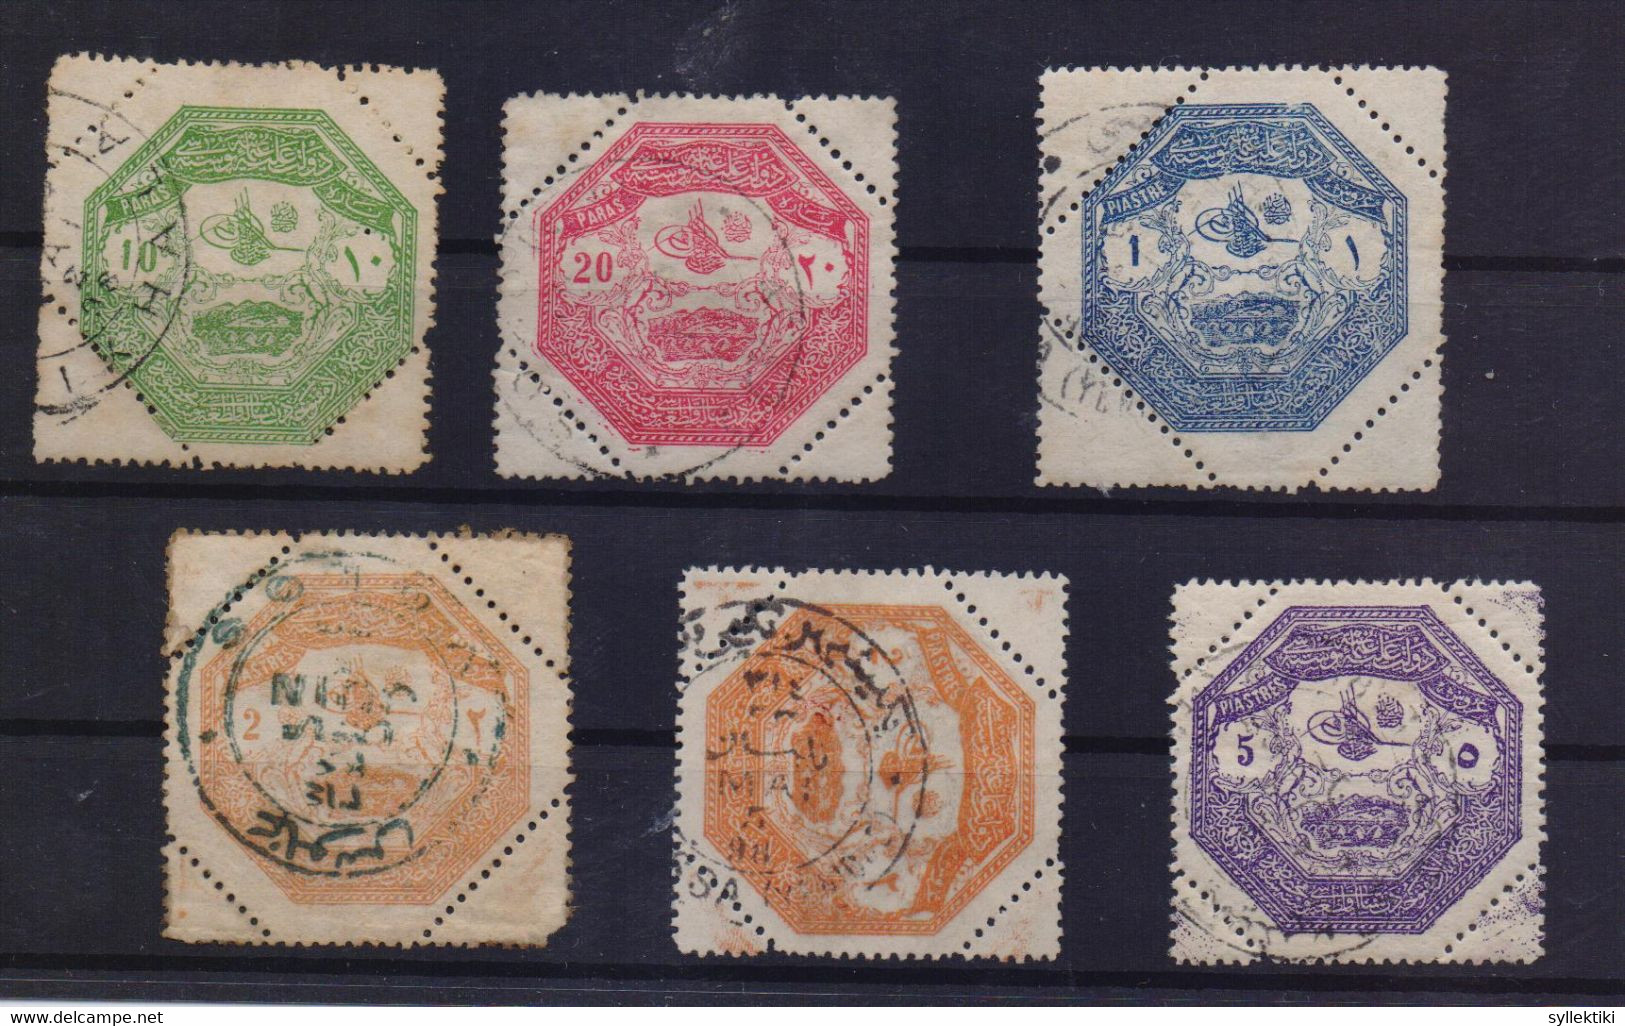 GREECE 1898 THESALLY COMPLETE SET USED STAMPS - Thessalië